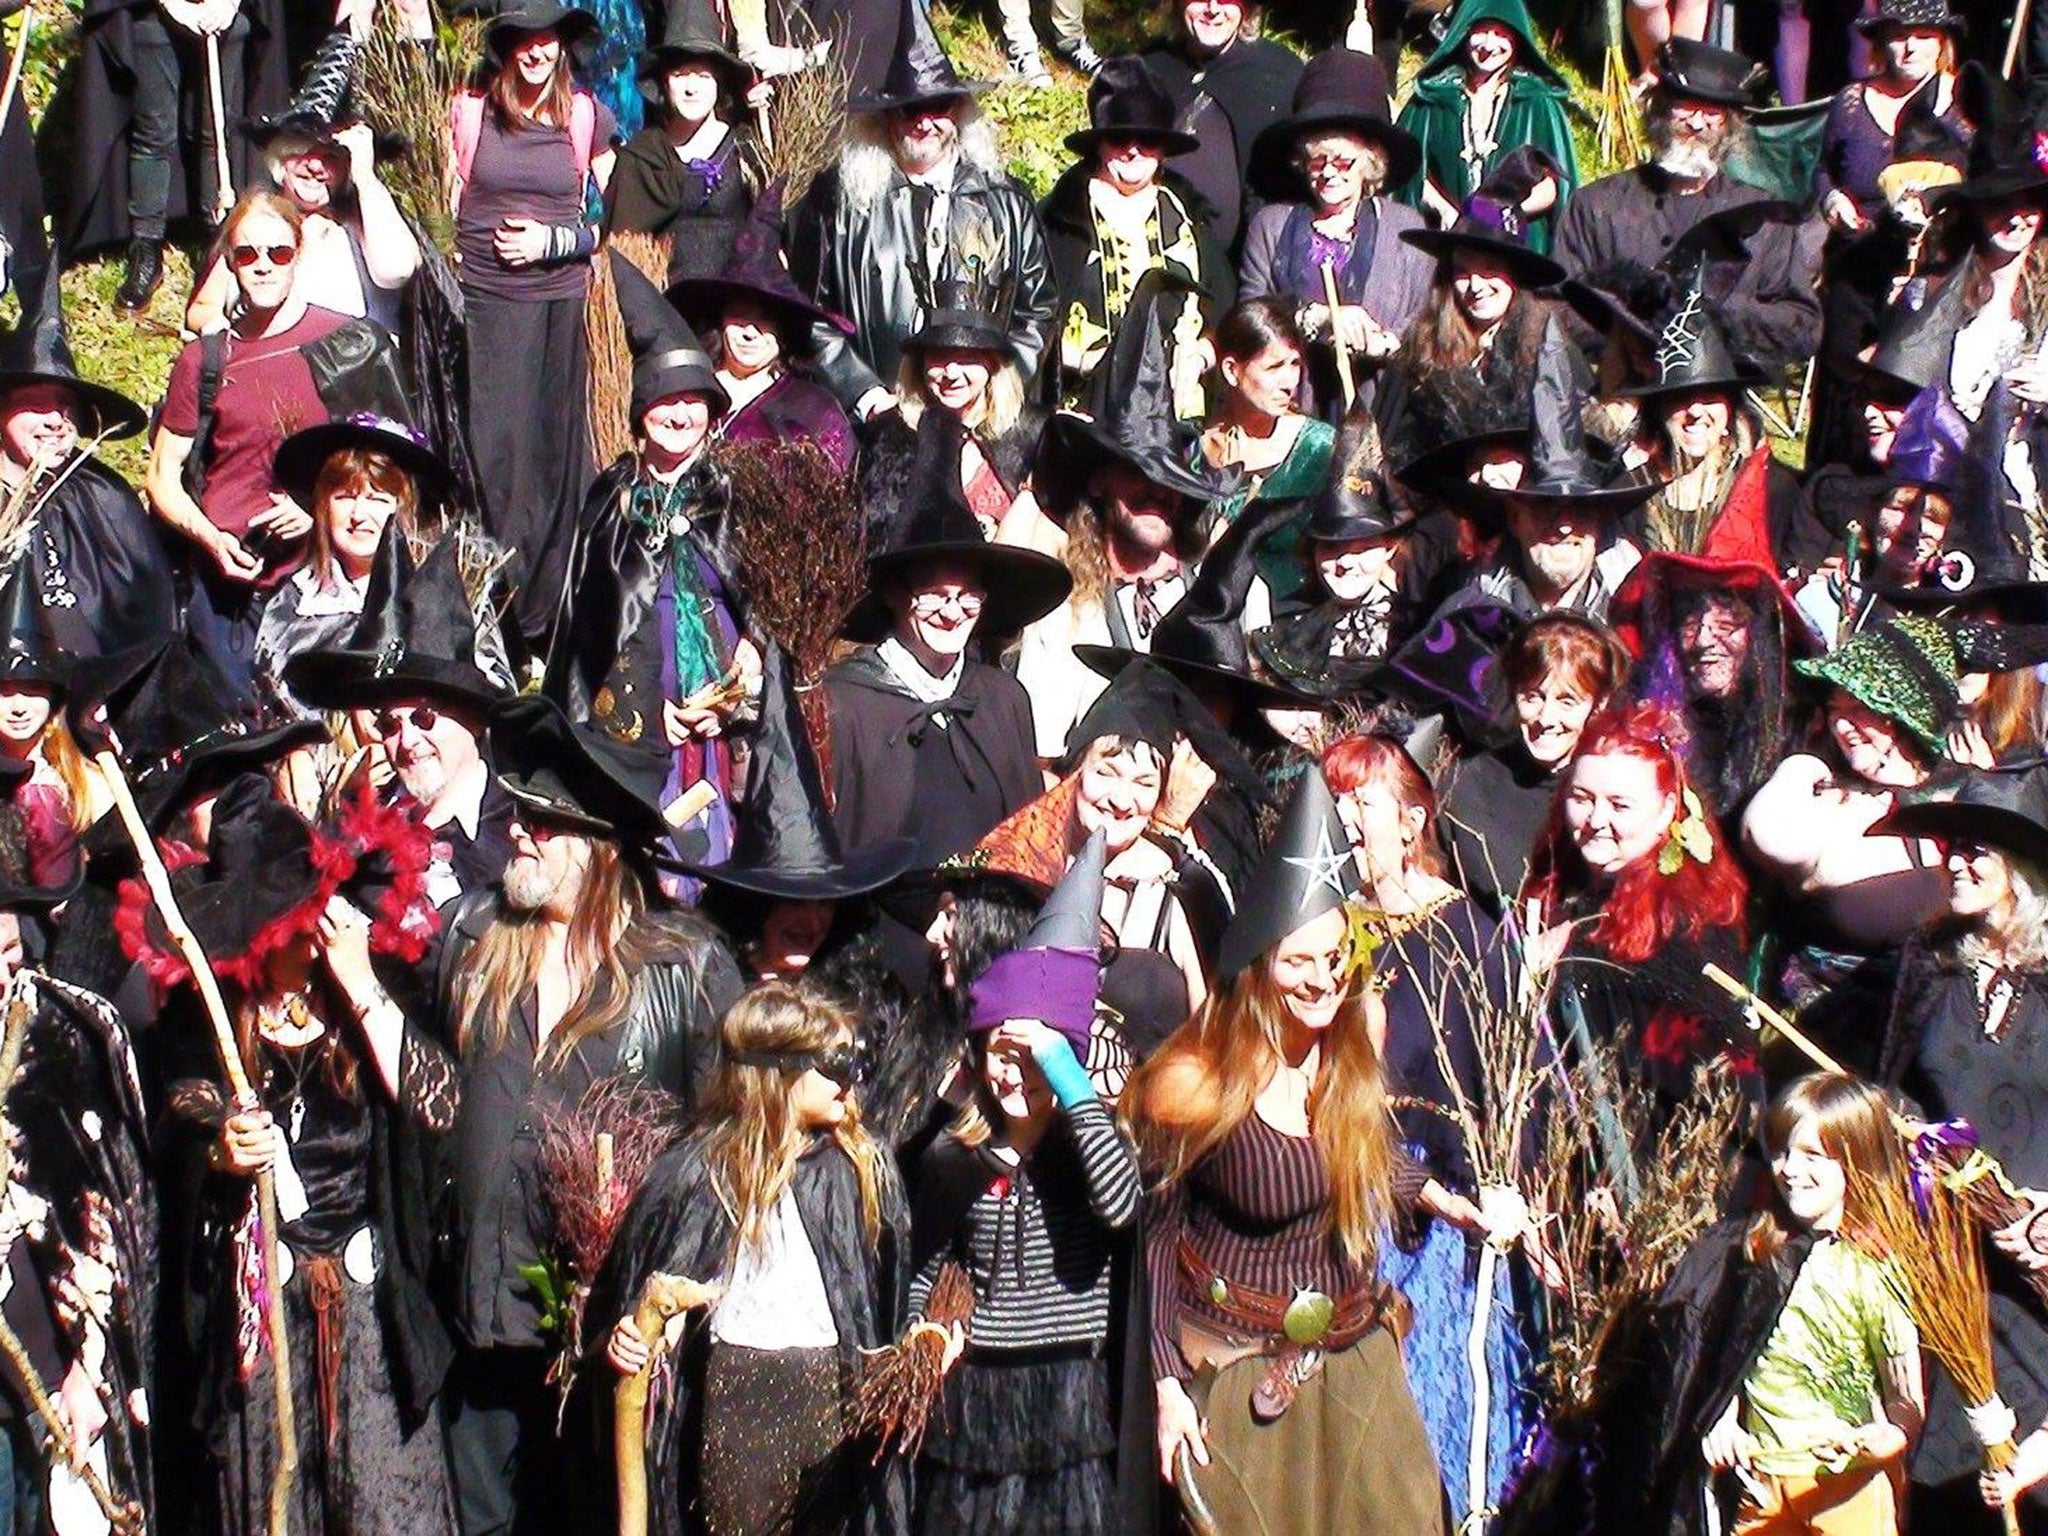 The Grand Witches’ Tea Party at Rougemont Castle in Exeter remembered the persecution of women